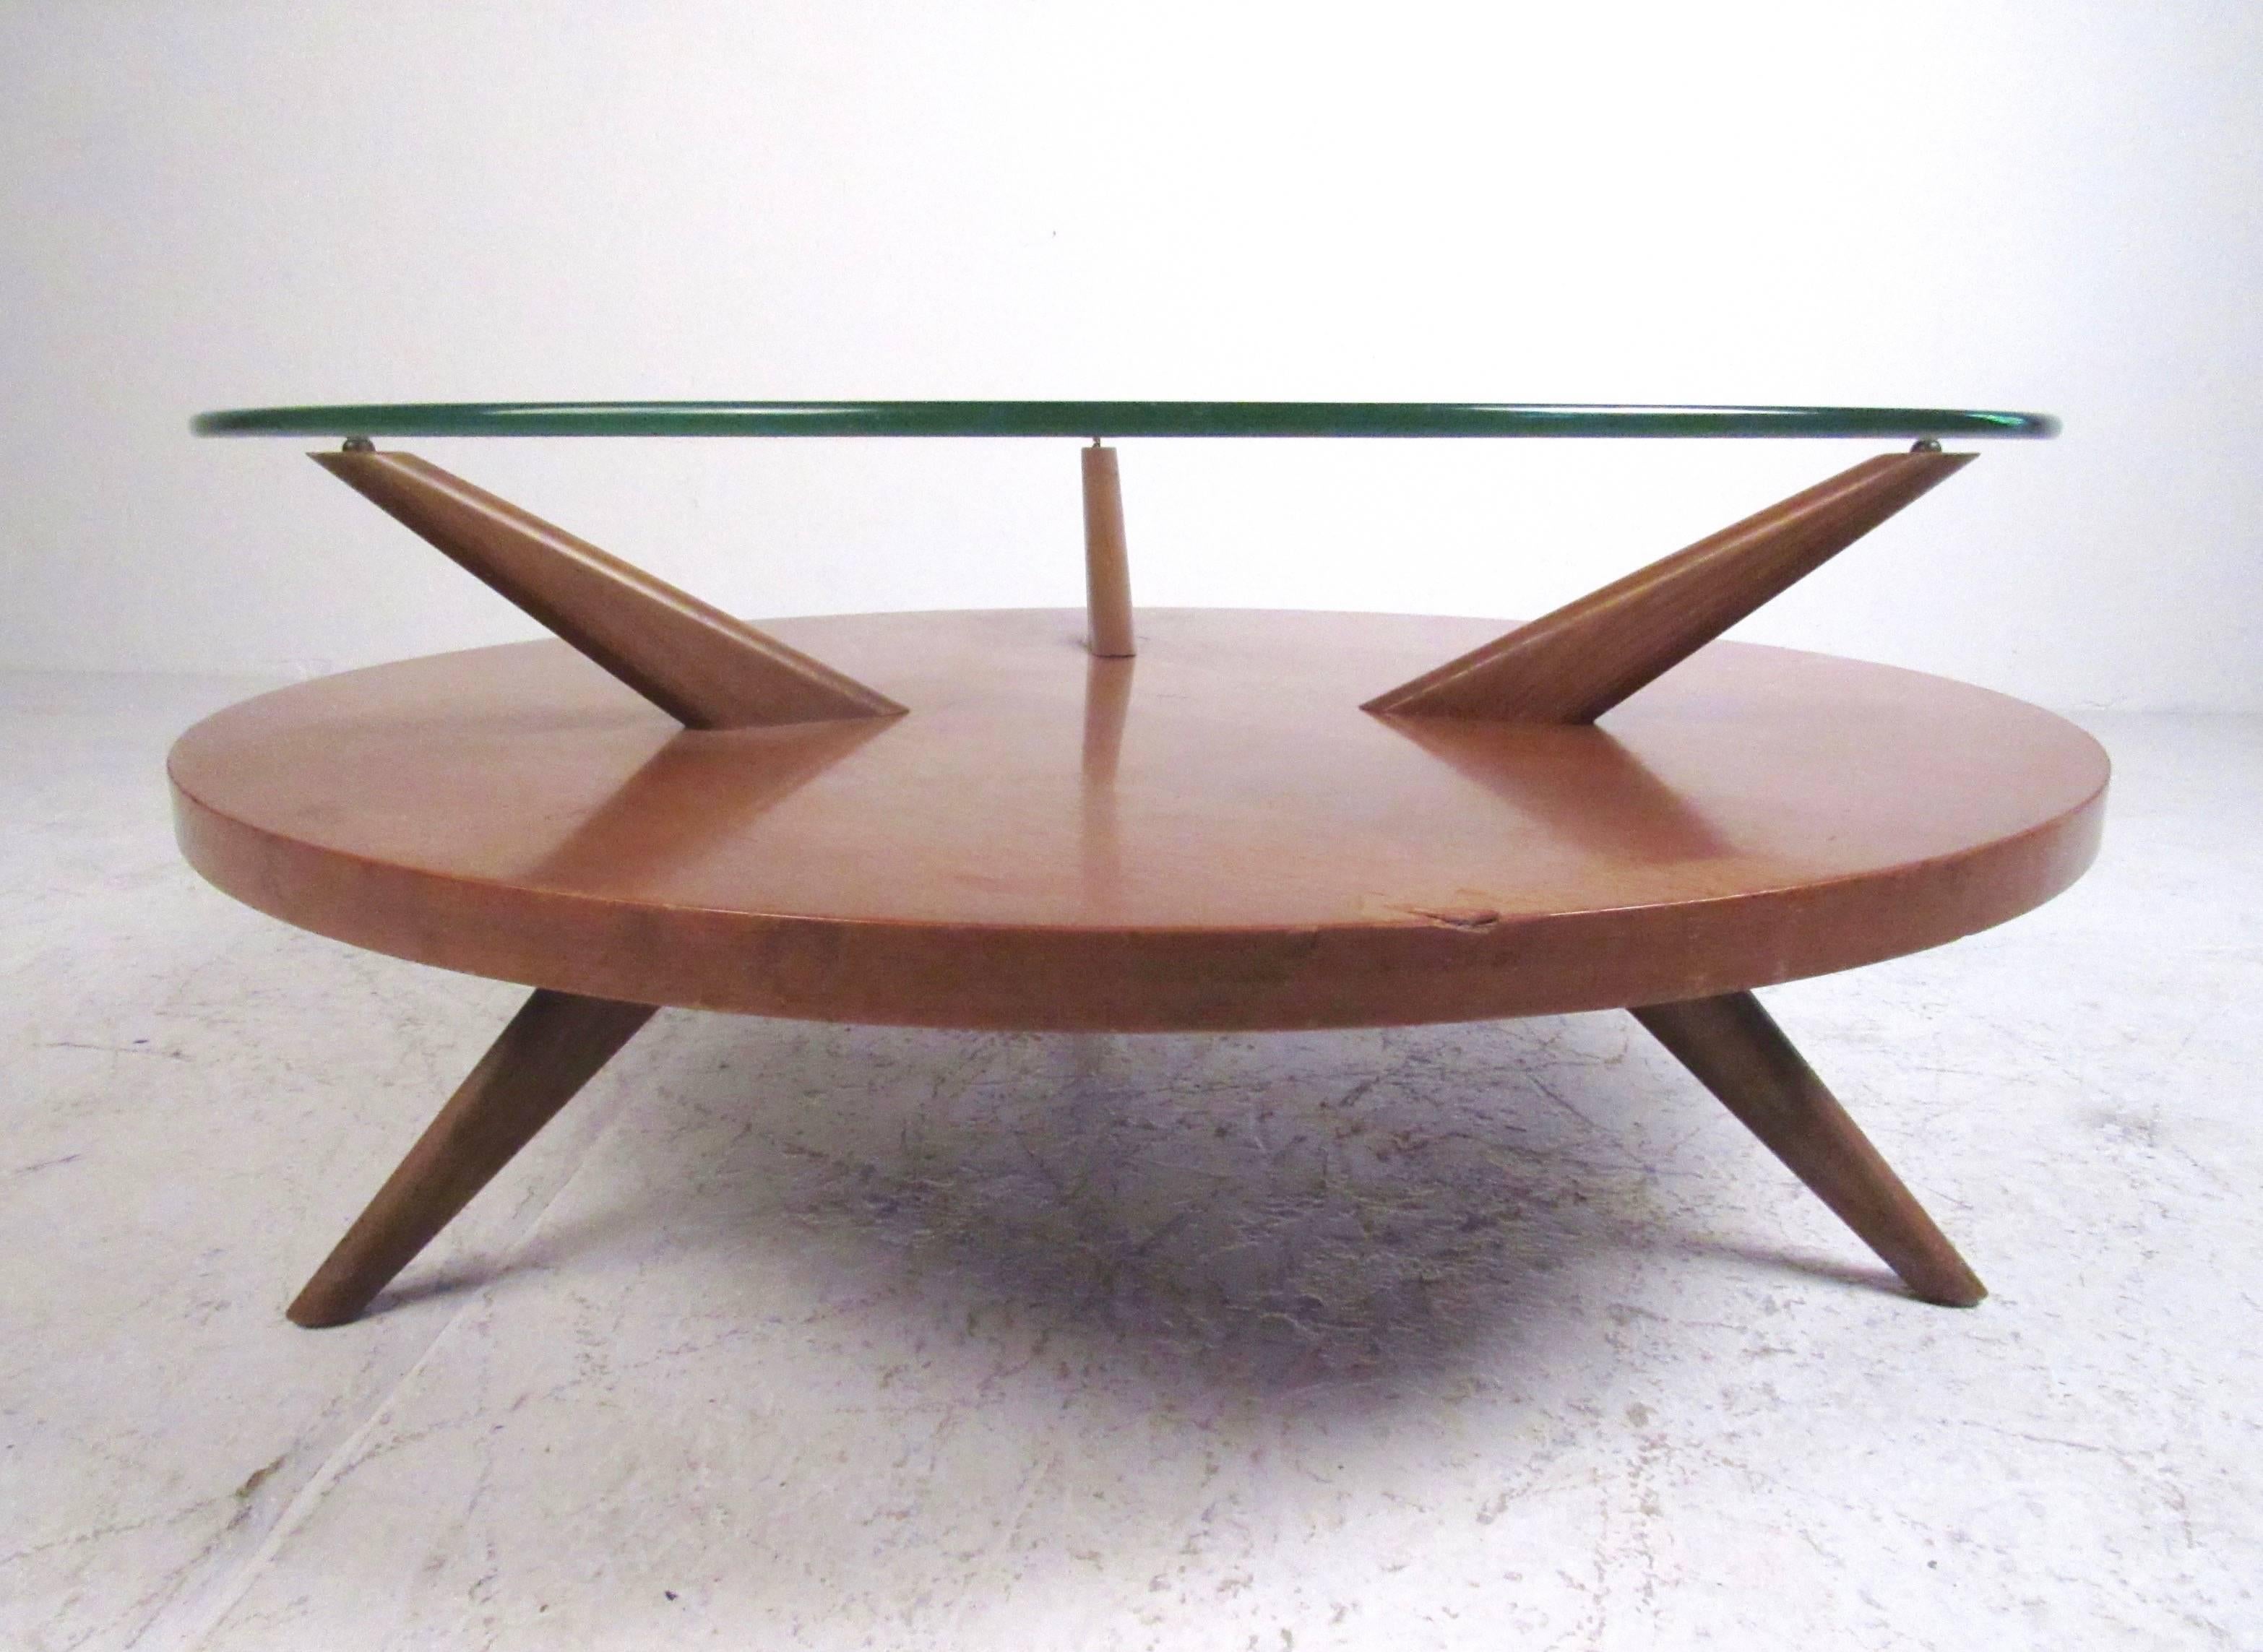 This vintage two-tier coffee table features sculpted legs, circular glass top, and vintage walnut finish. The Mid-Century Modern Heywood-Wakefield style of this table makes it an impressive addition to any seating area, please confirm item location